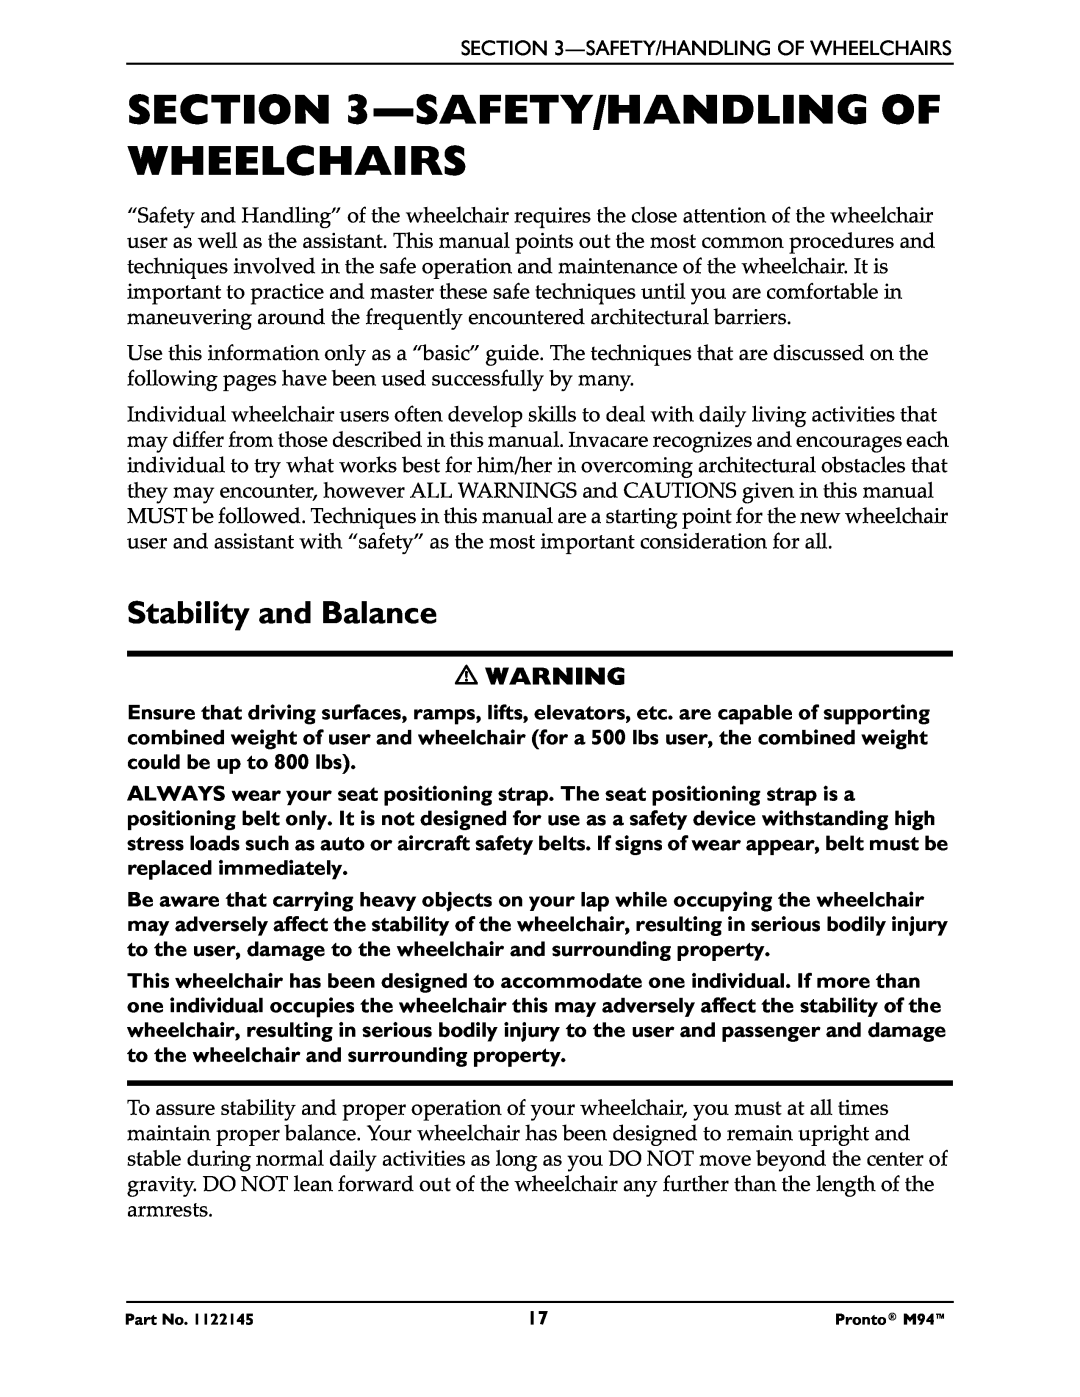 Invacare Pronto M71 manual Safety/Handling Of Wheelchairs, Stability and Balance 